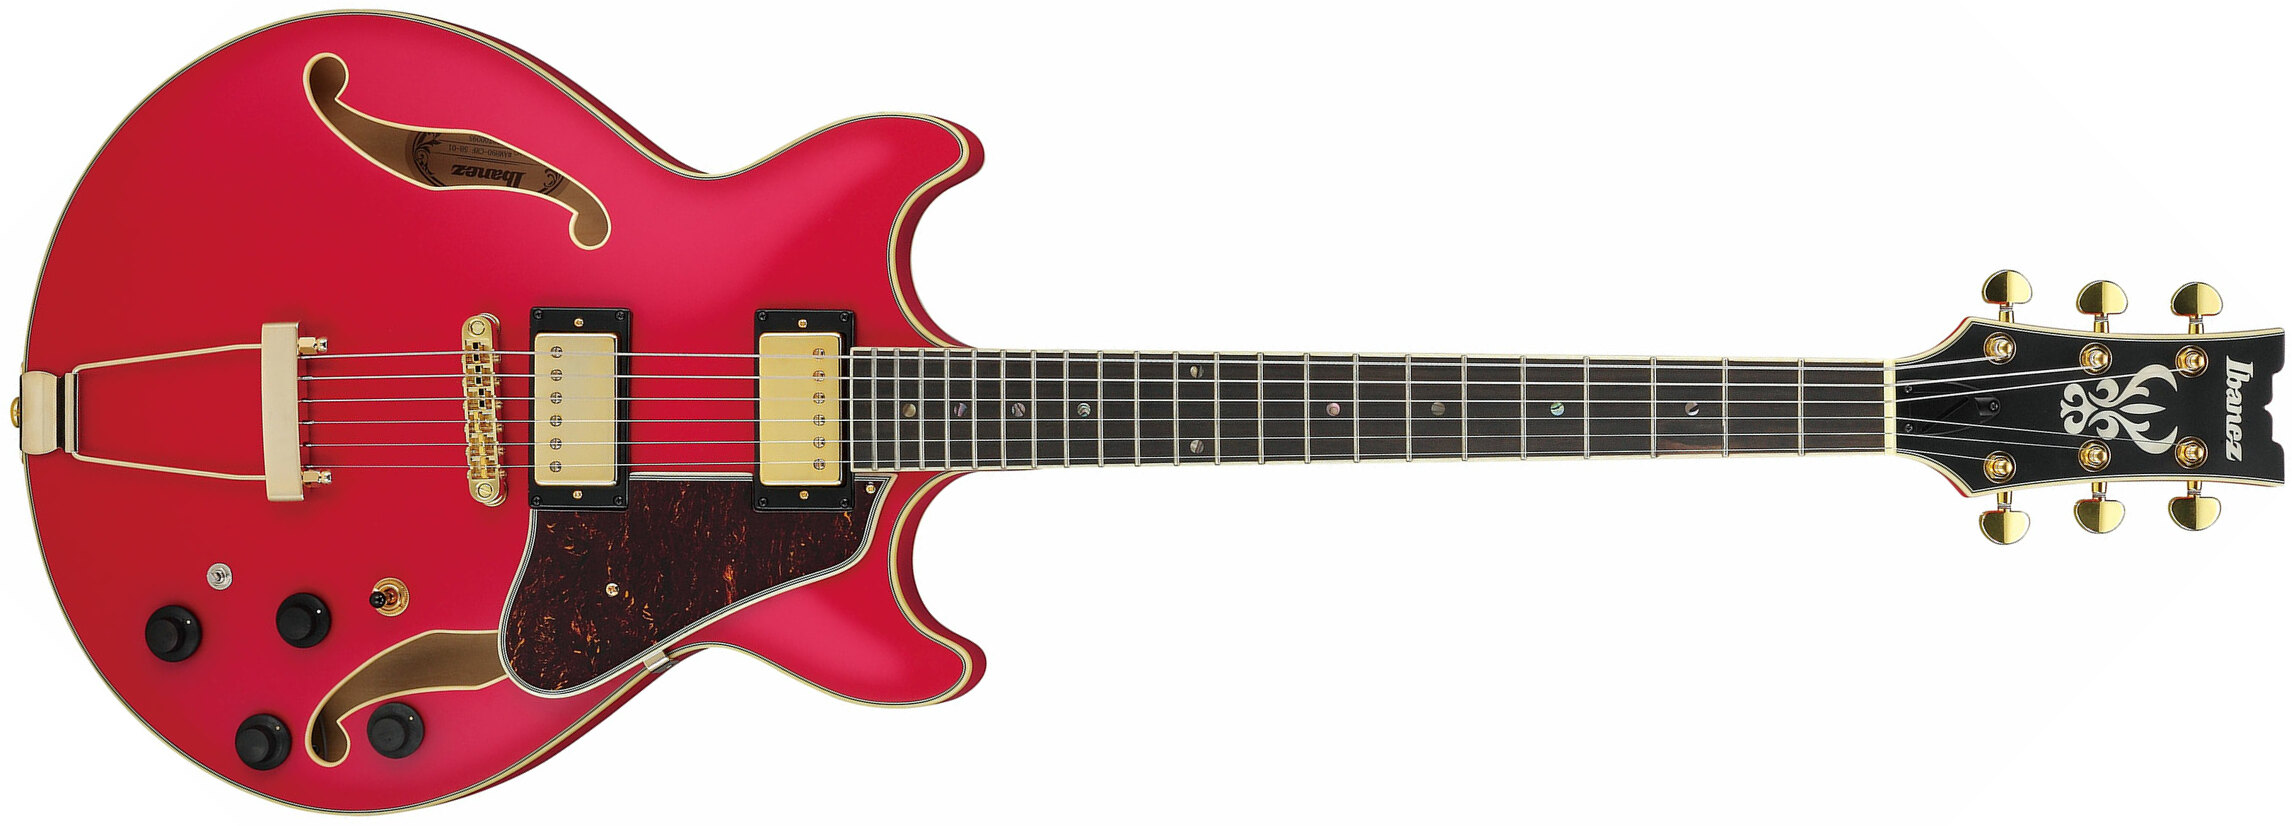 Ibanez Amh90 Crf Artcore Expressionist 2h Ht Eb - Cherry Red Flat - Hollow bodytock elektrische gitaar - Main picture